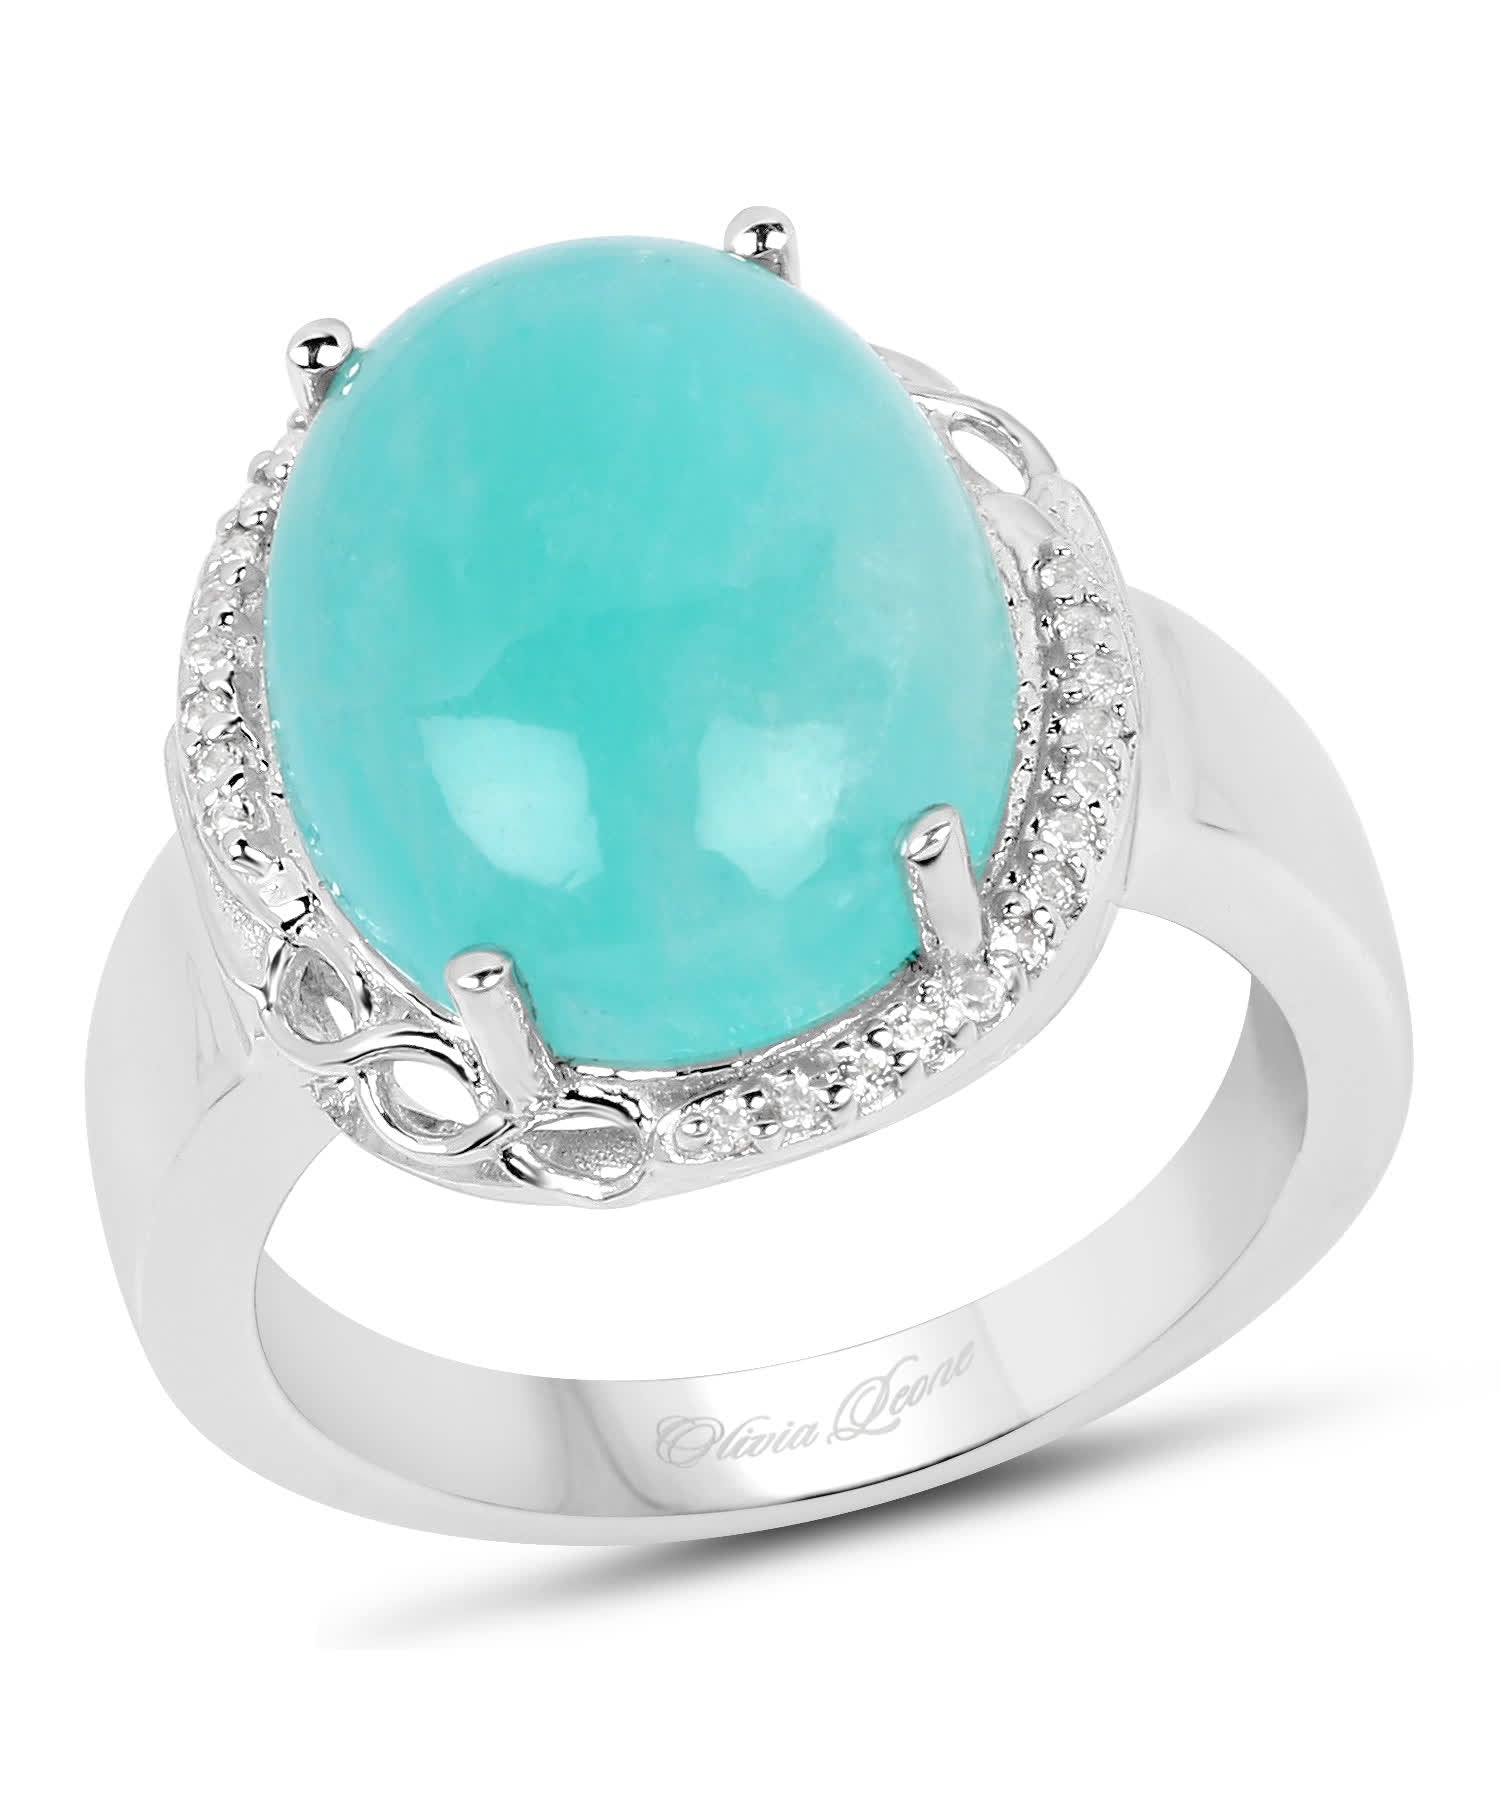 Olivia Leone 7.86ctw Natural Amazonite and Topaz Rhodium Plated 925 Sterling Silver Designer Ring View 1